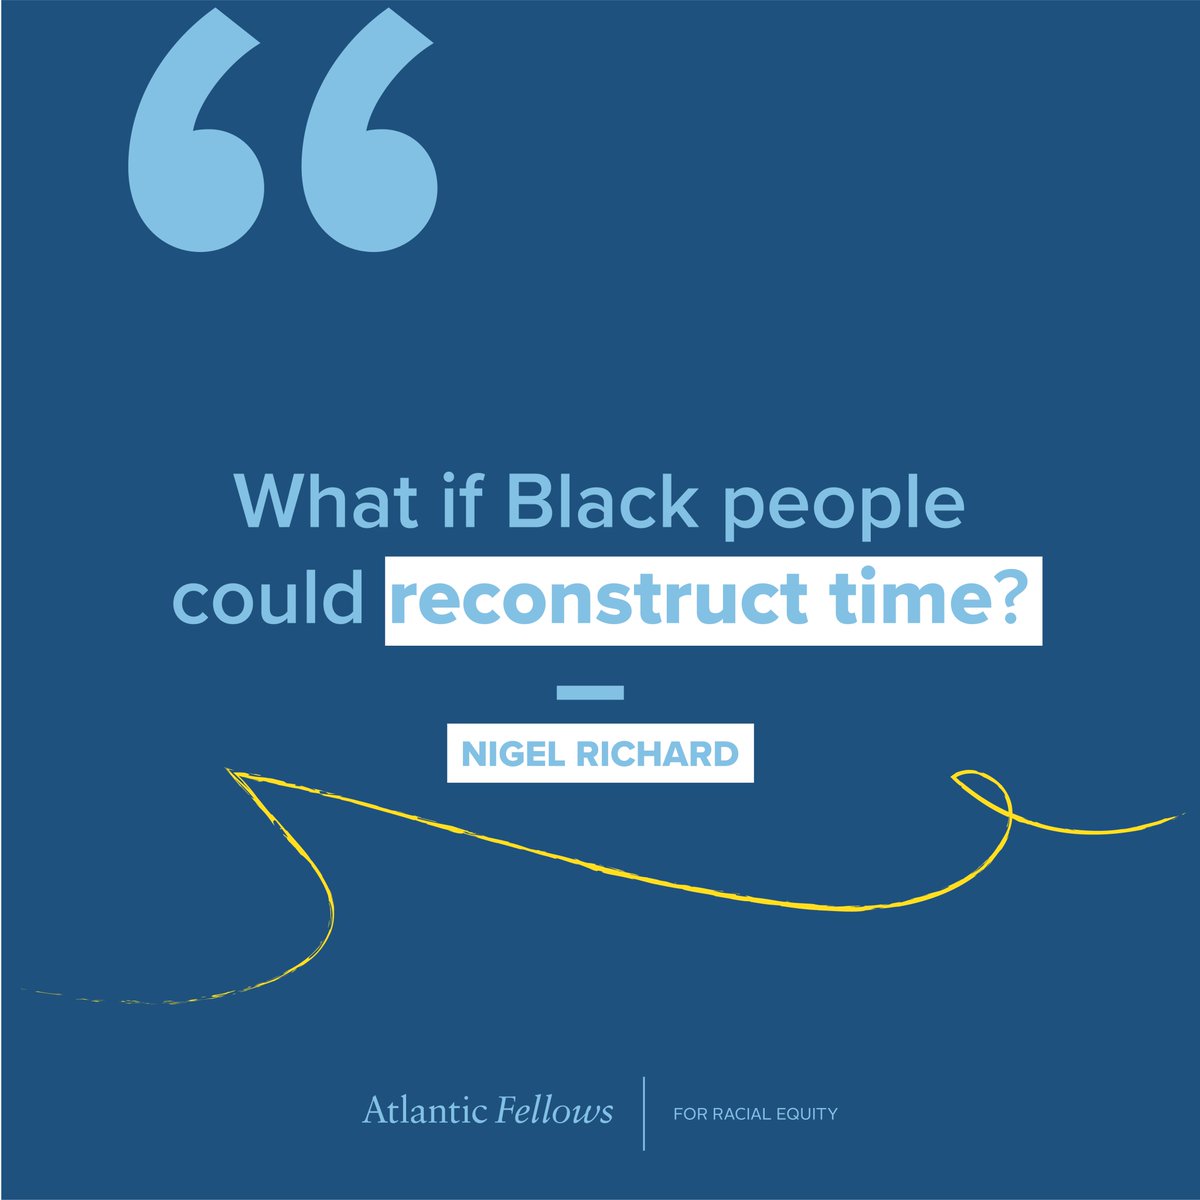 How we understand taken-for-granted notions like time shapes our political lives, says AFRE Senior Programme Director and Facilitator Nigel Richard, so what if we could reconstruct them in pursuit of liberation? READ his full reflection on the blog: racialequity.atlanticfellows.org/blog/insight-f…